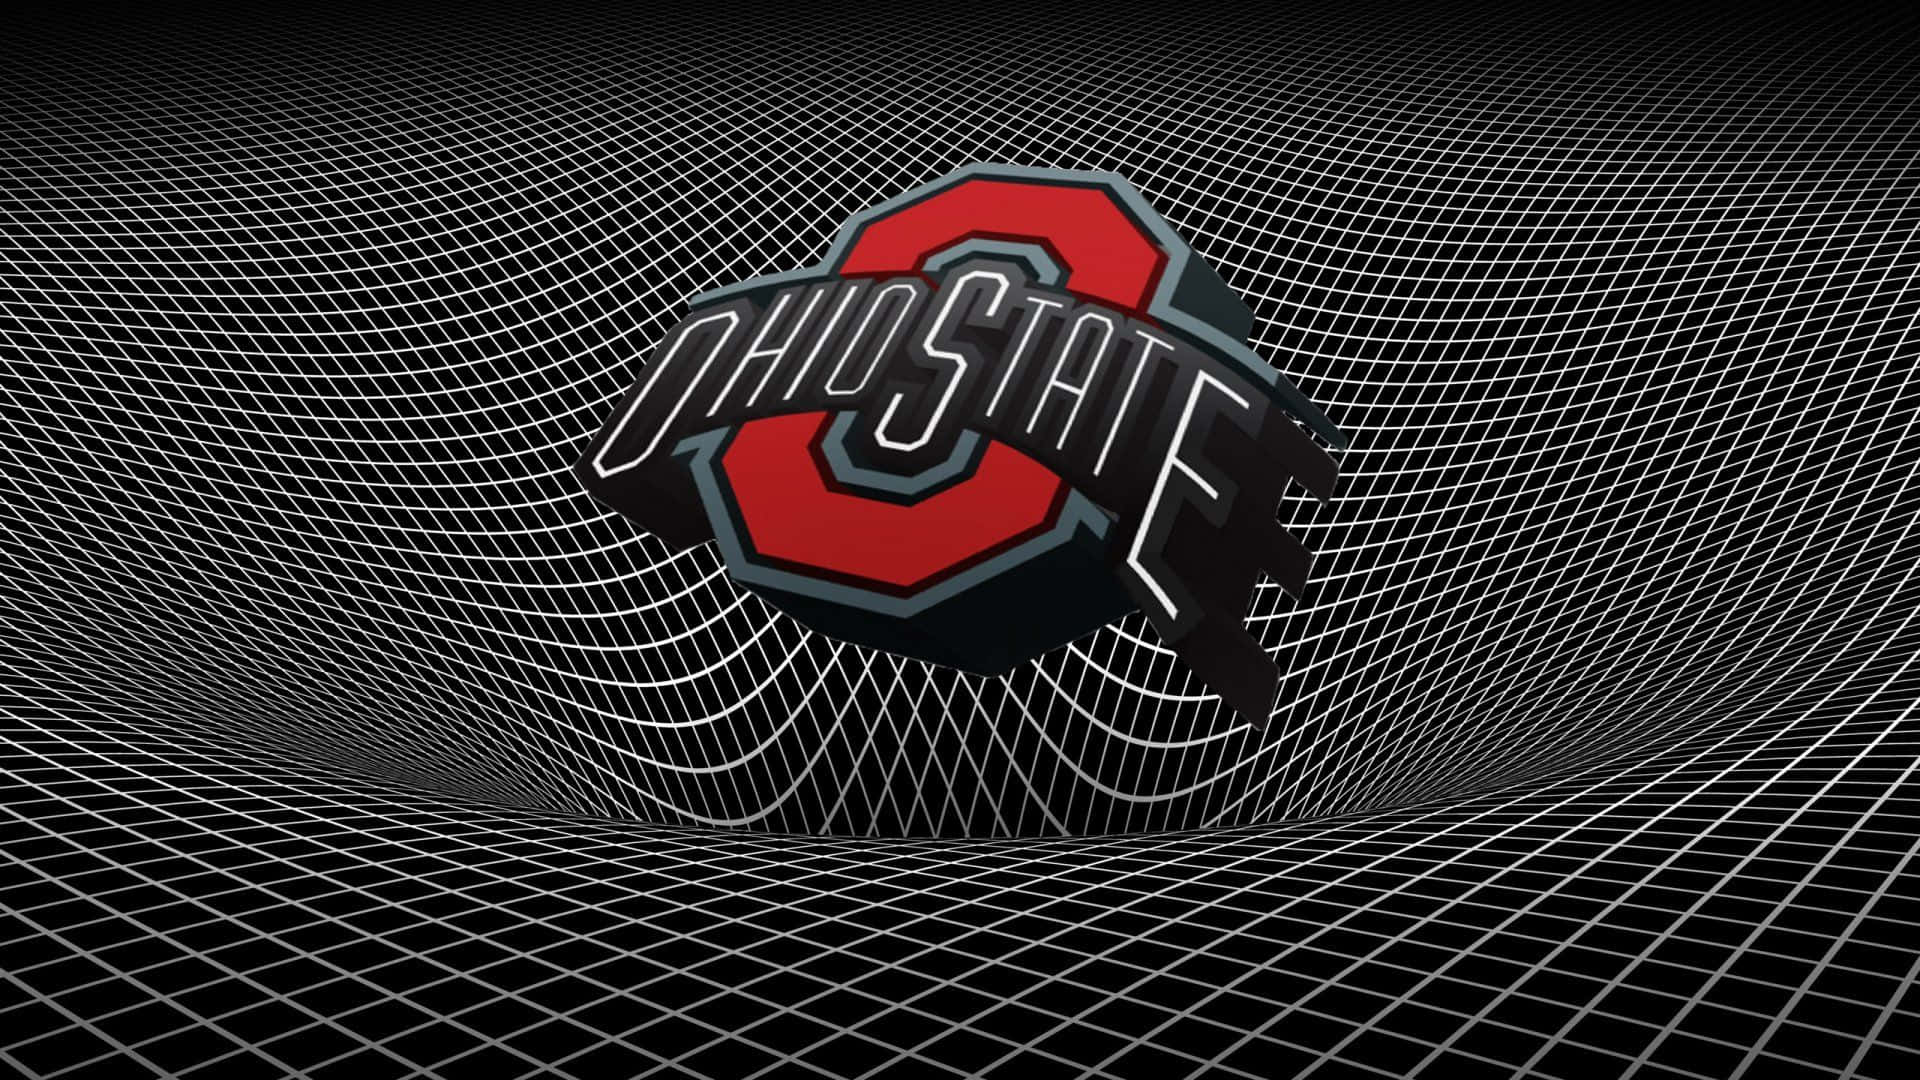 Cool Ohio State Pictures Wallpaper